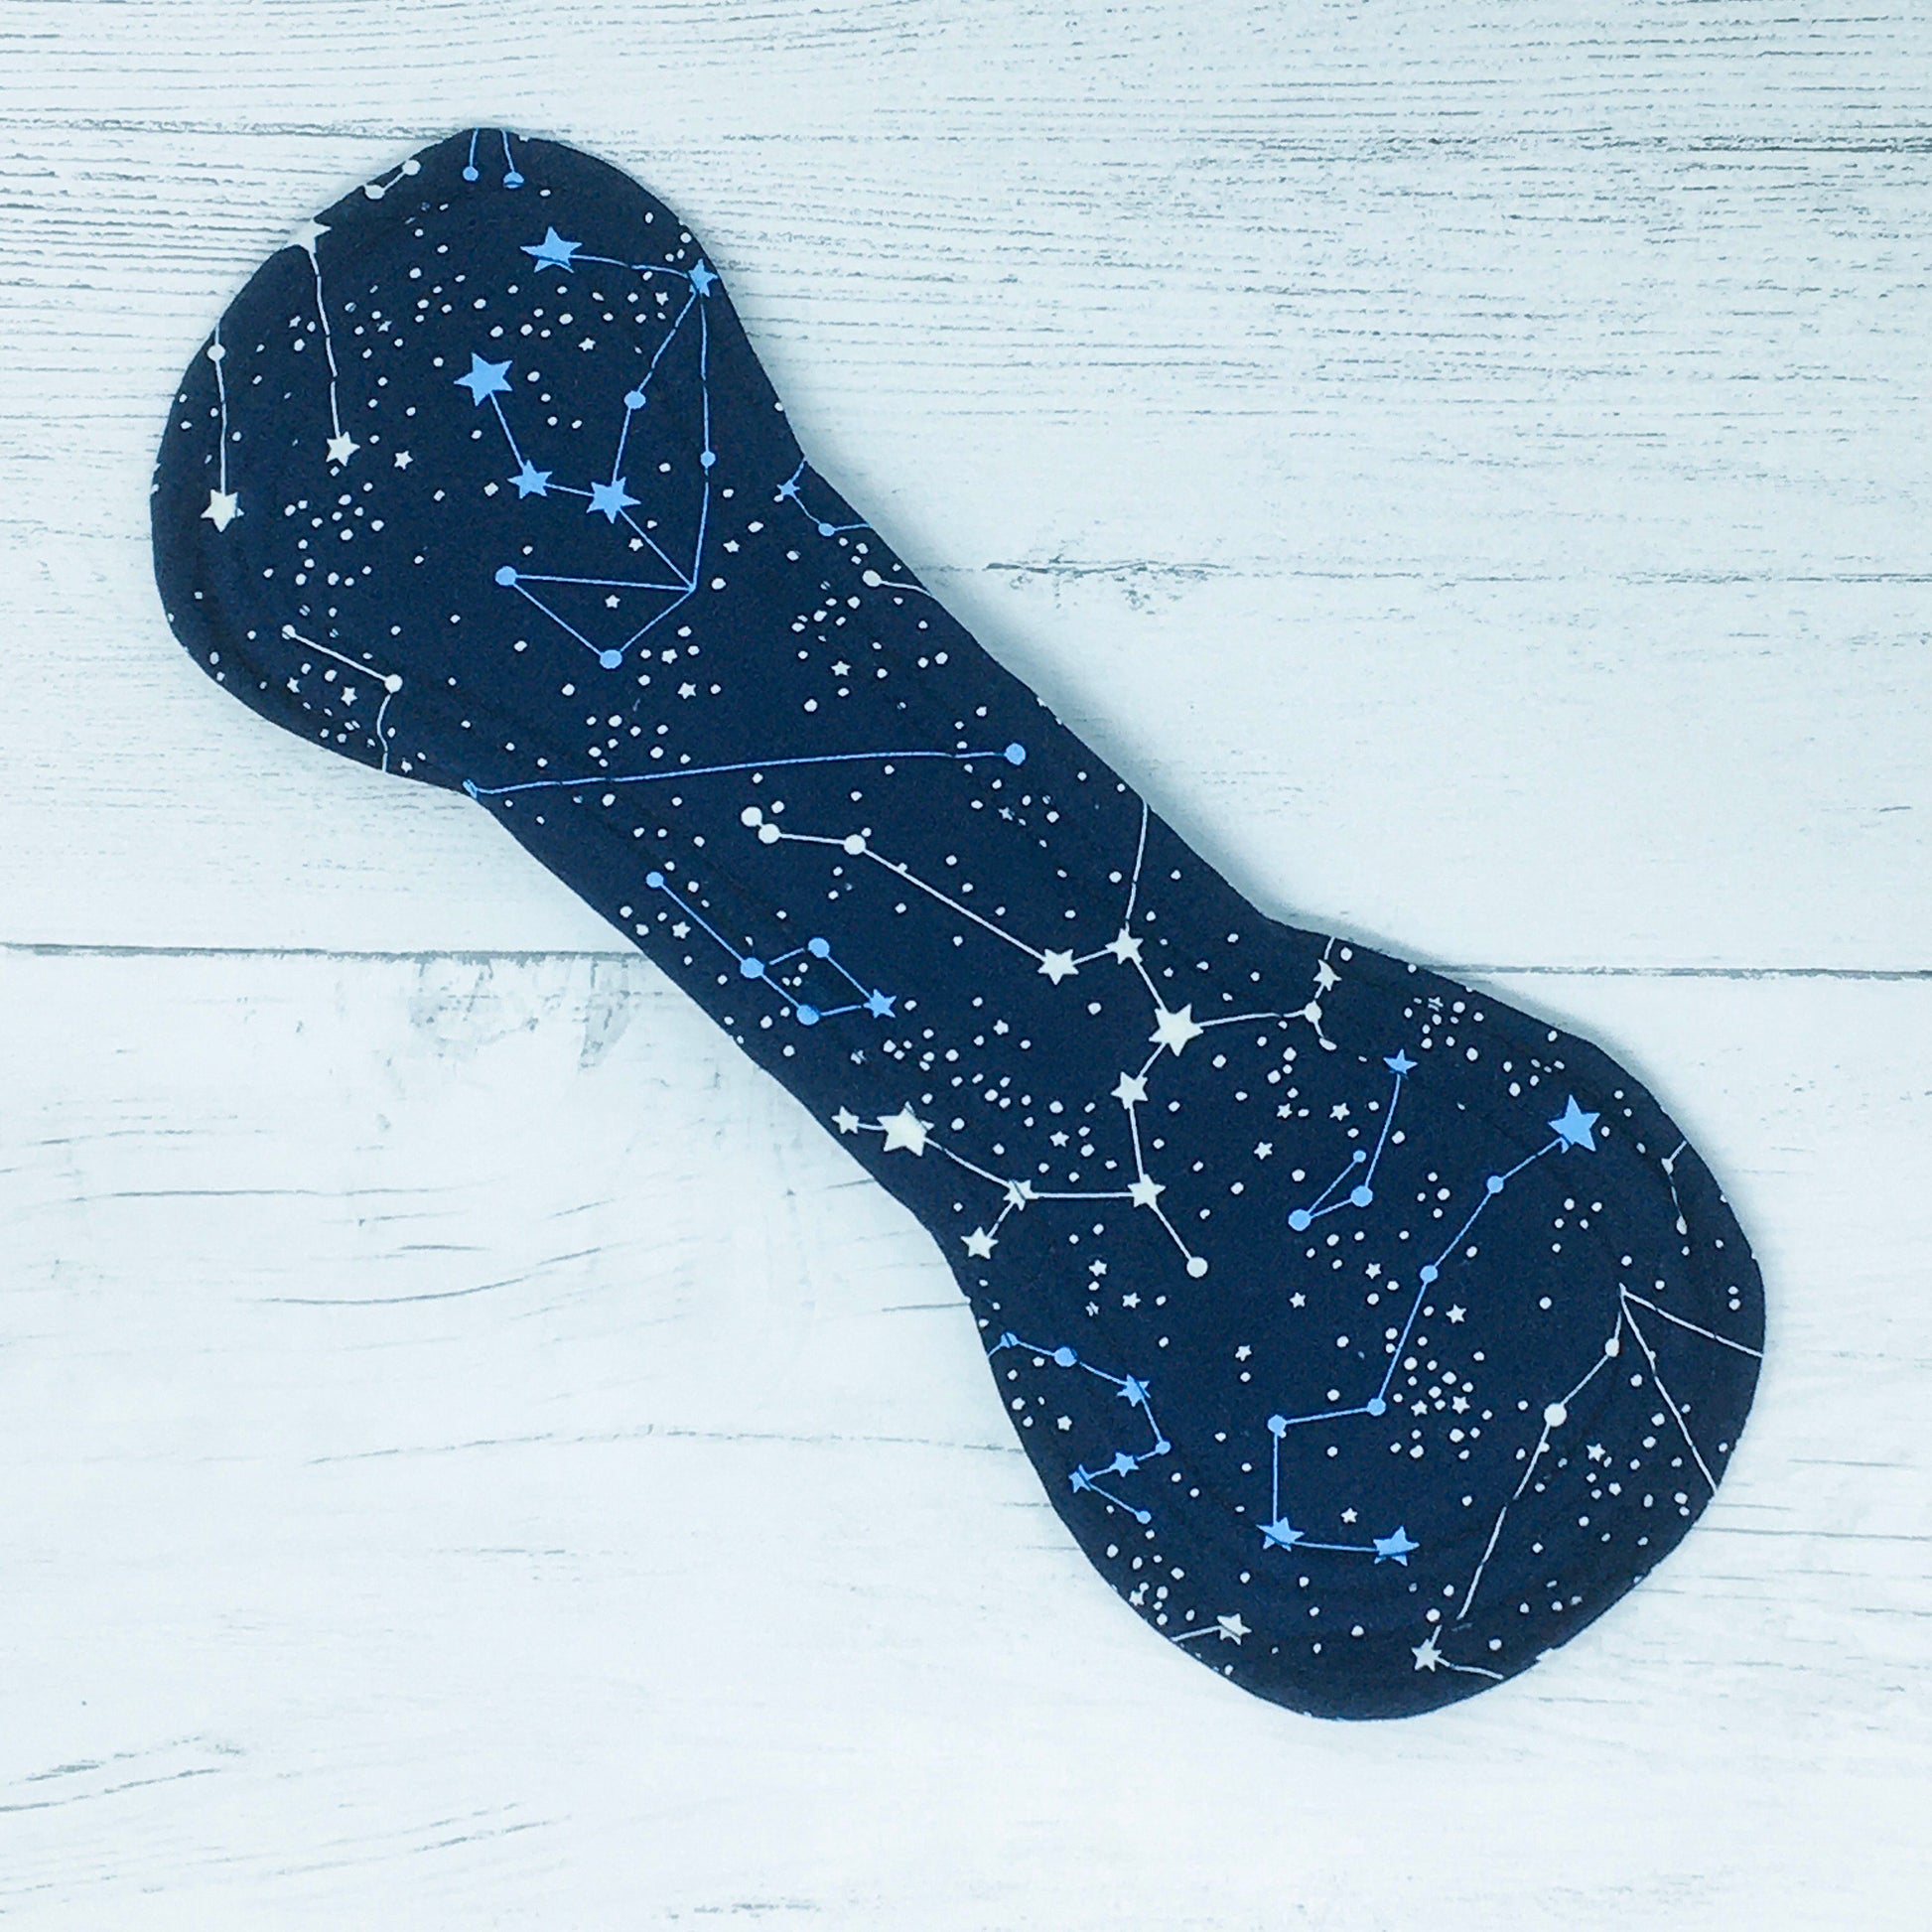 11" Reusable menstrual pad with pattern of constellations on a navy cotton fabric. Front view of fastened pad